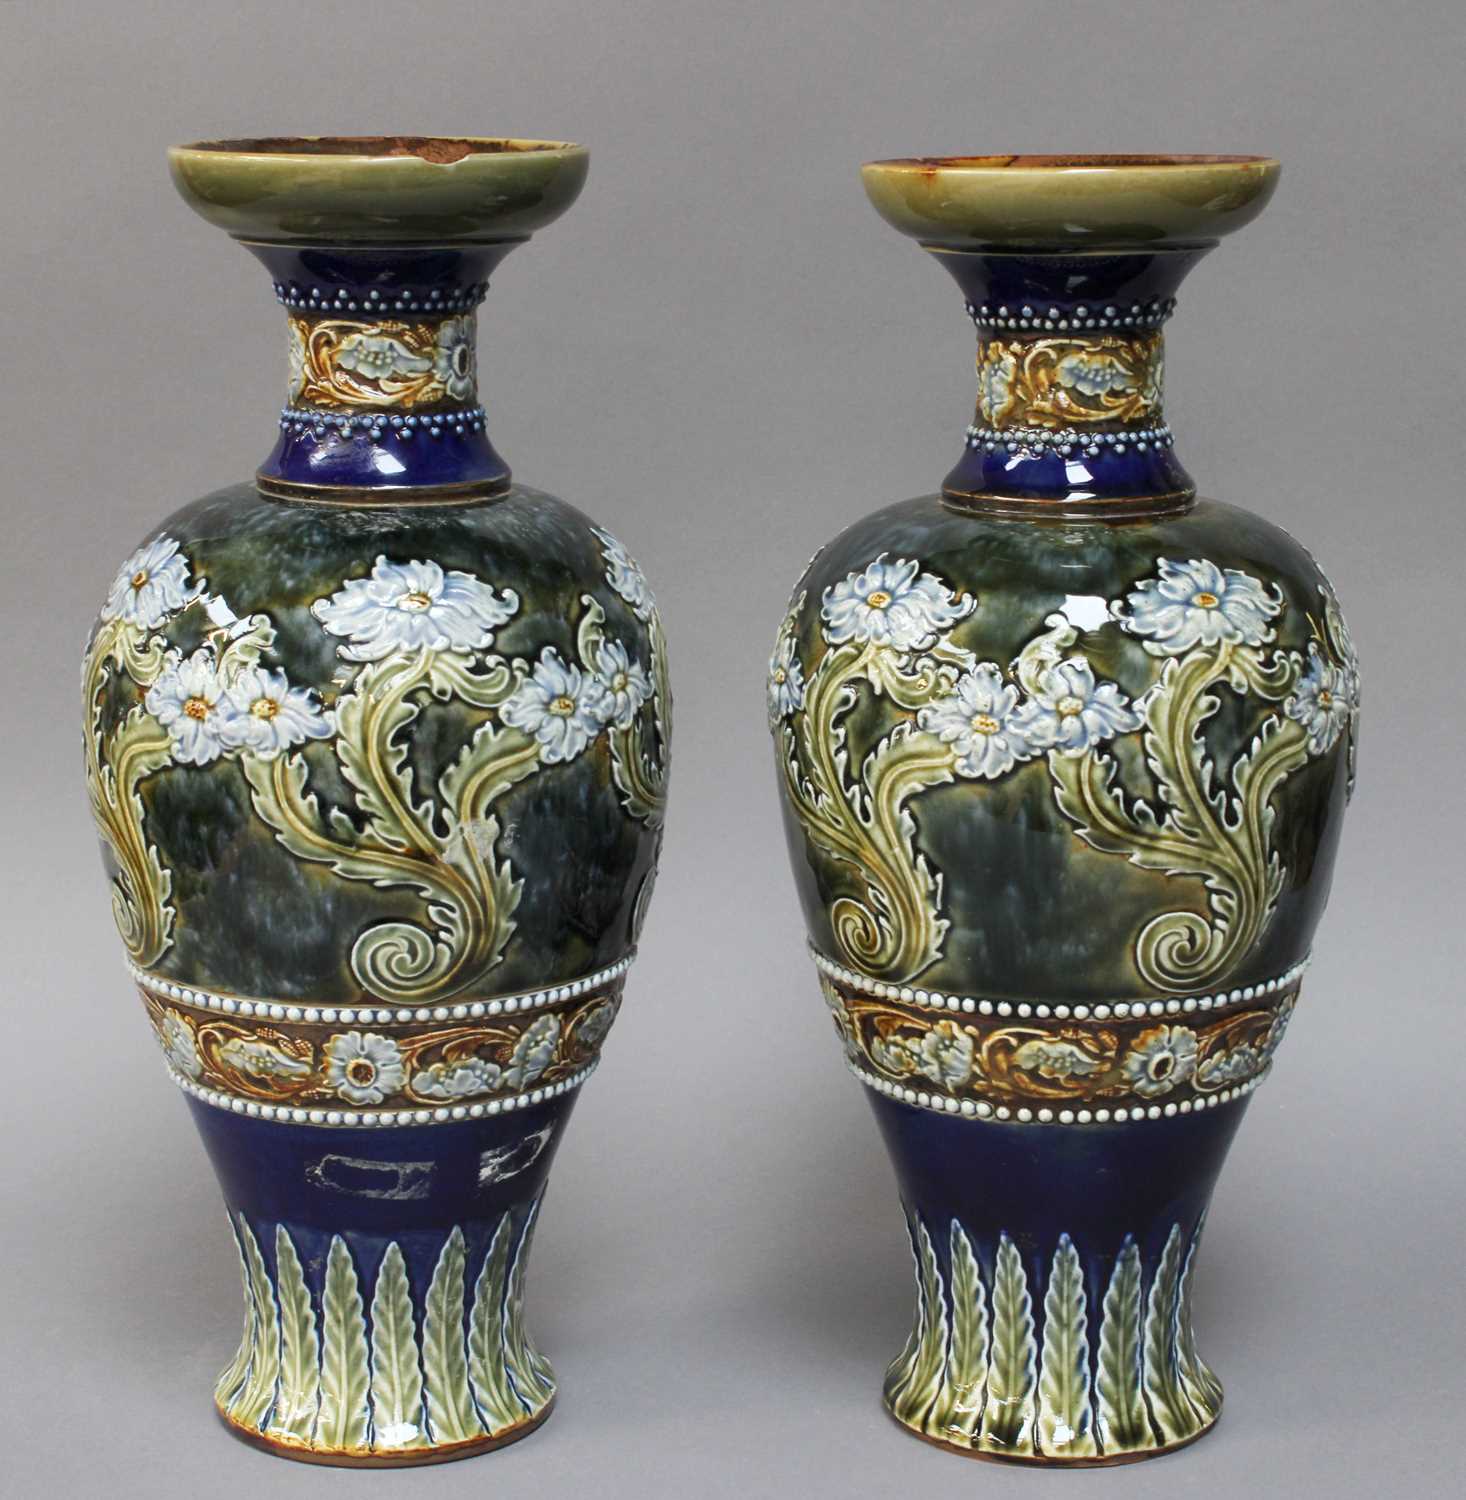 Lot 2 - A Pair of Royal Doulton Vases, numbered 2009